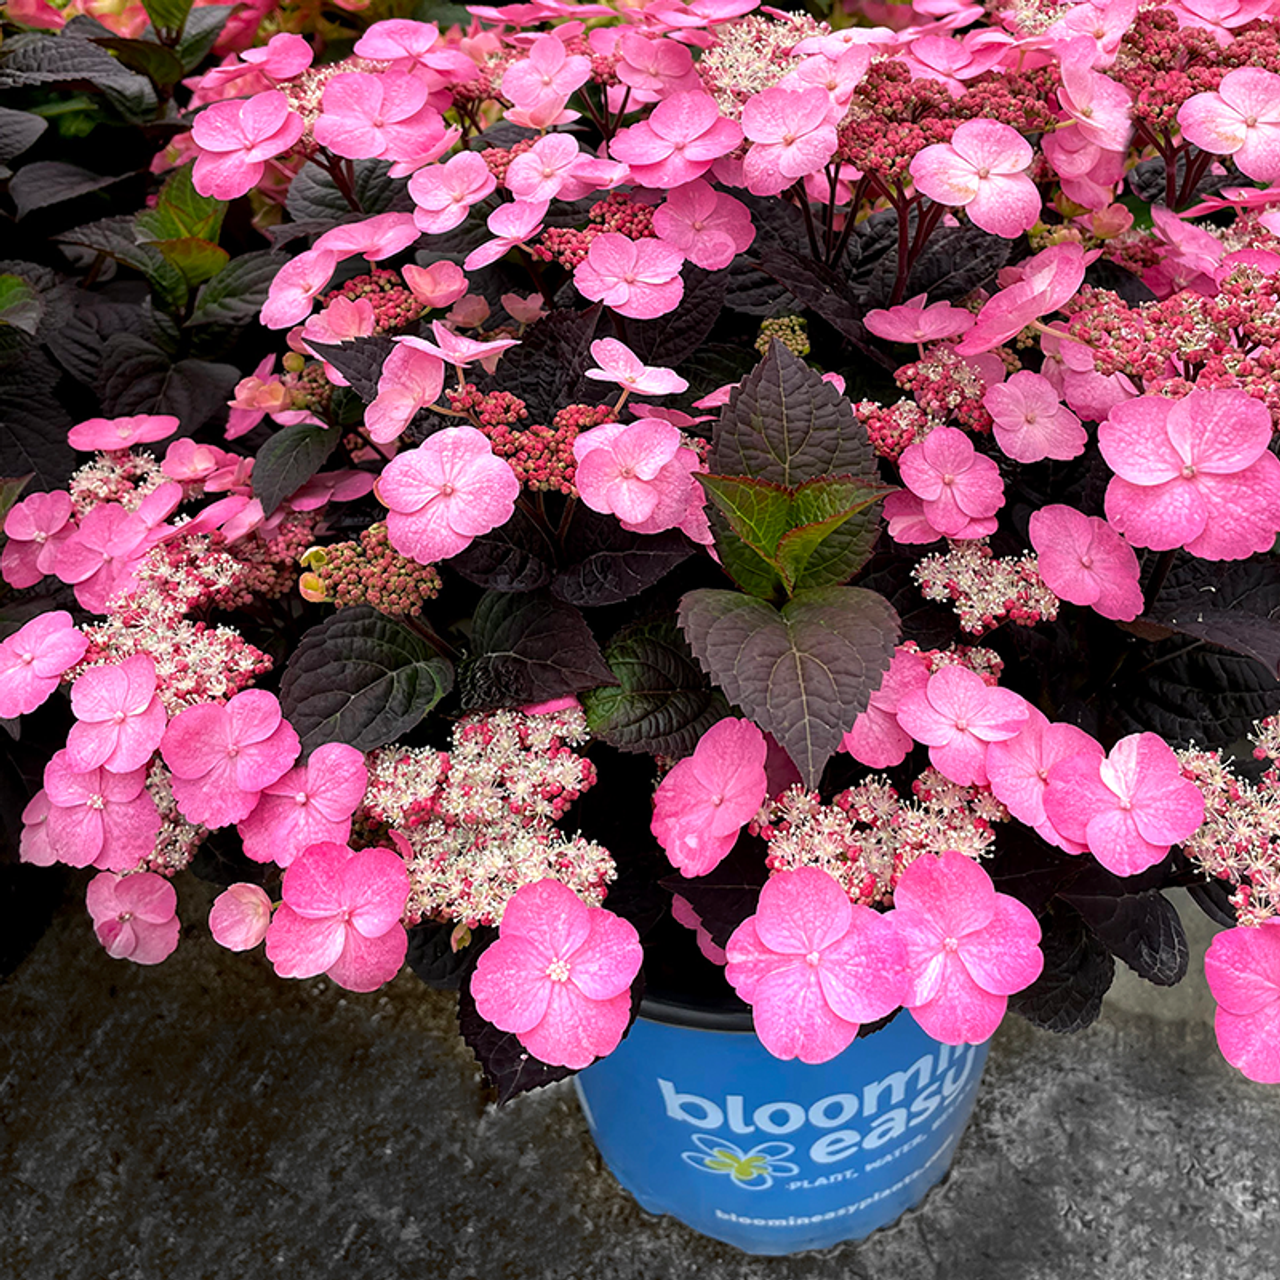 How to grow hydrangeas in pots: expert tips for containers